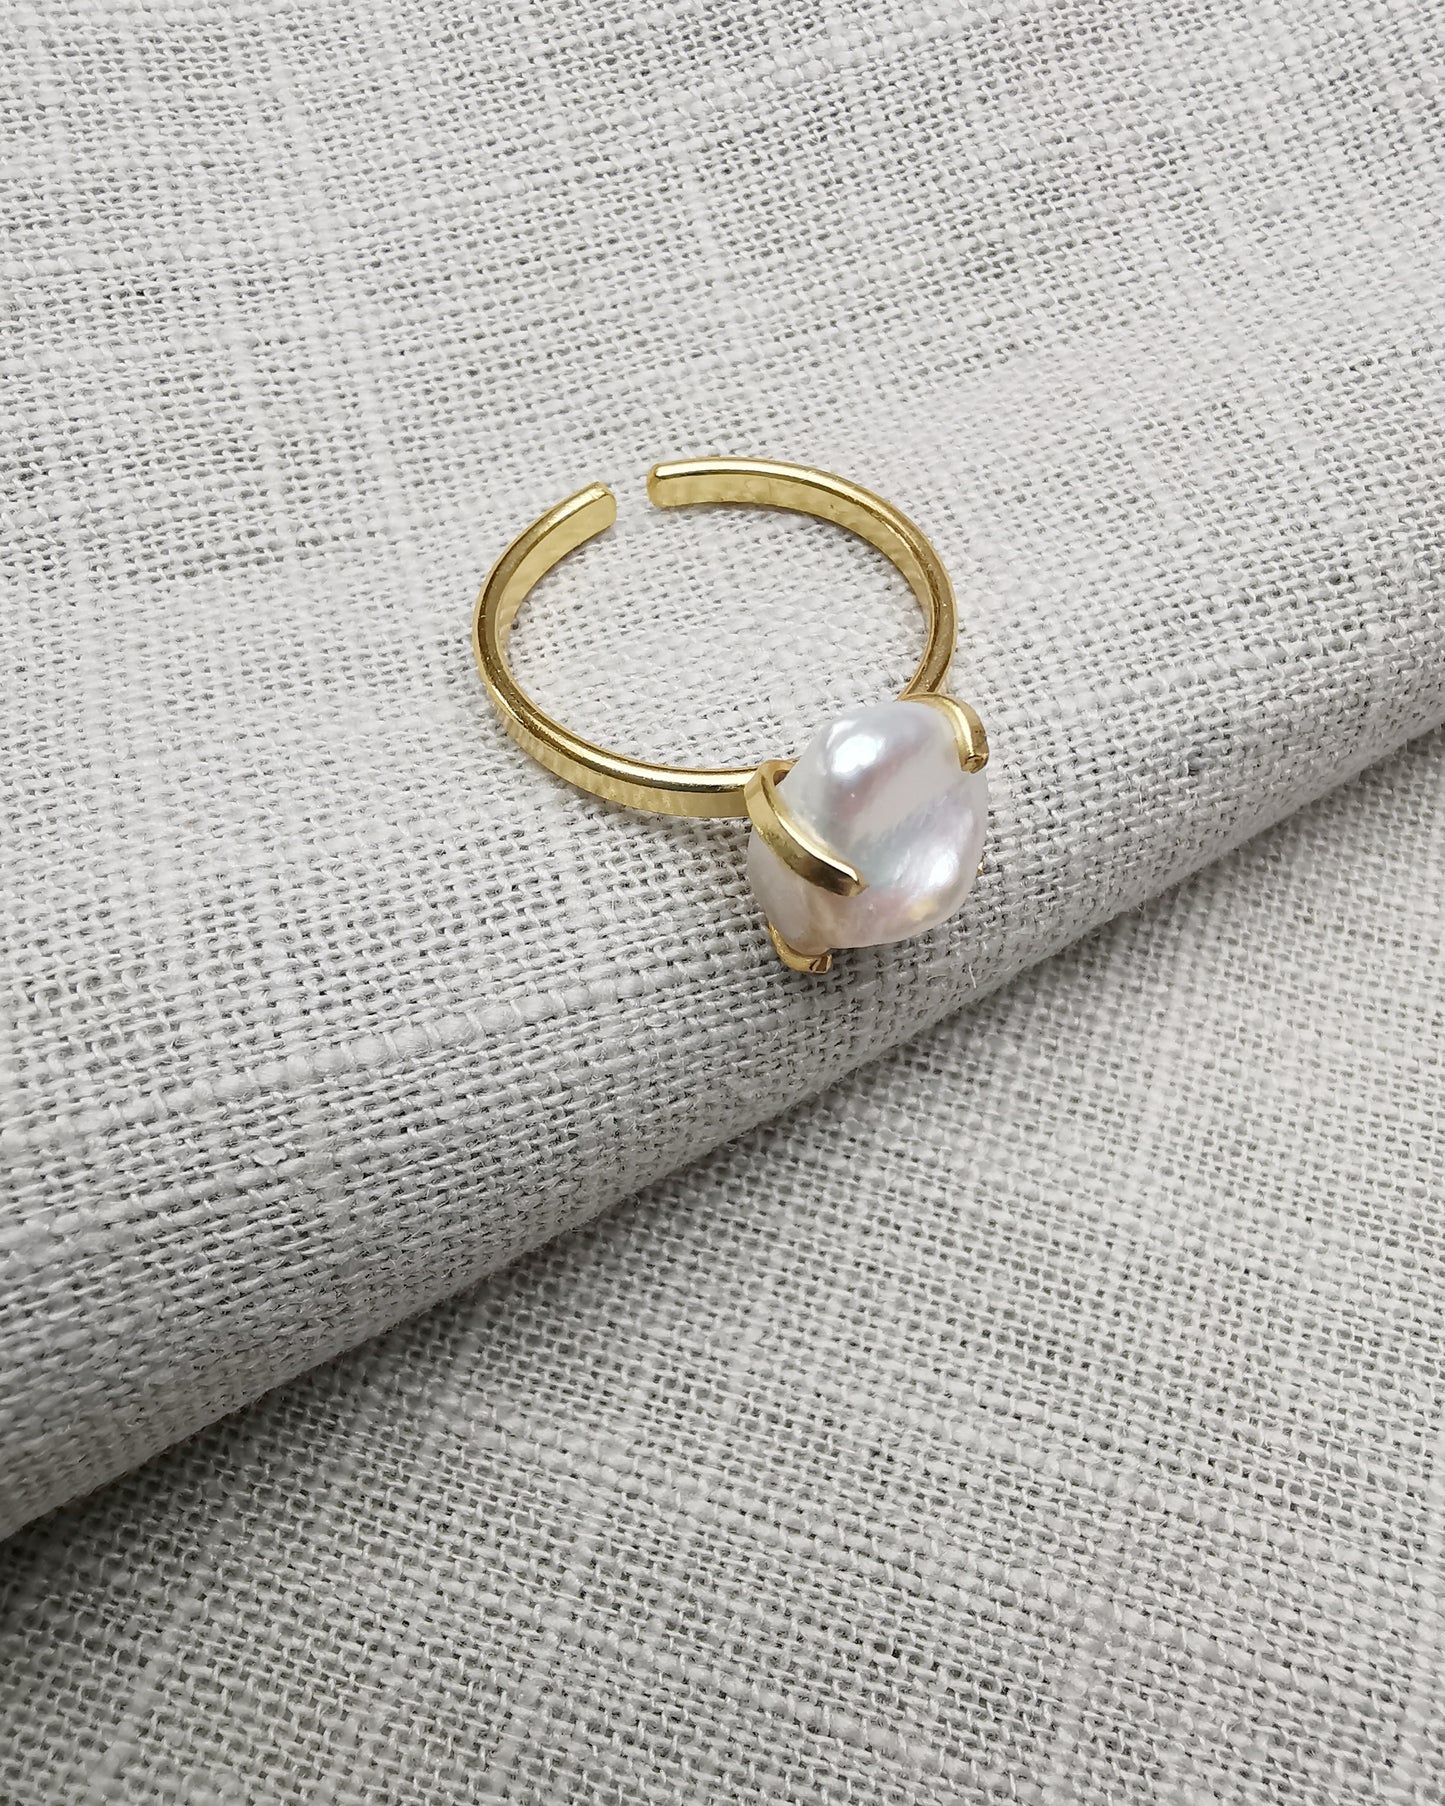 Freshwater Pearl Solitaire Adjustable Ring.